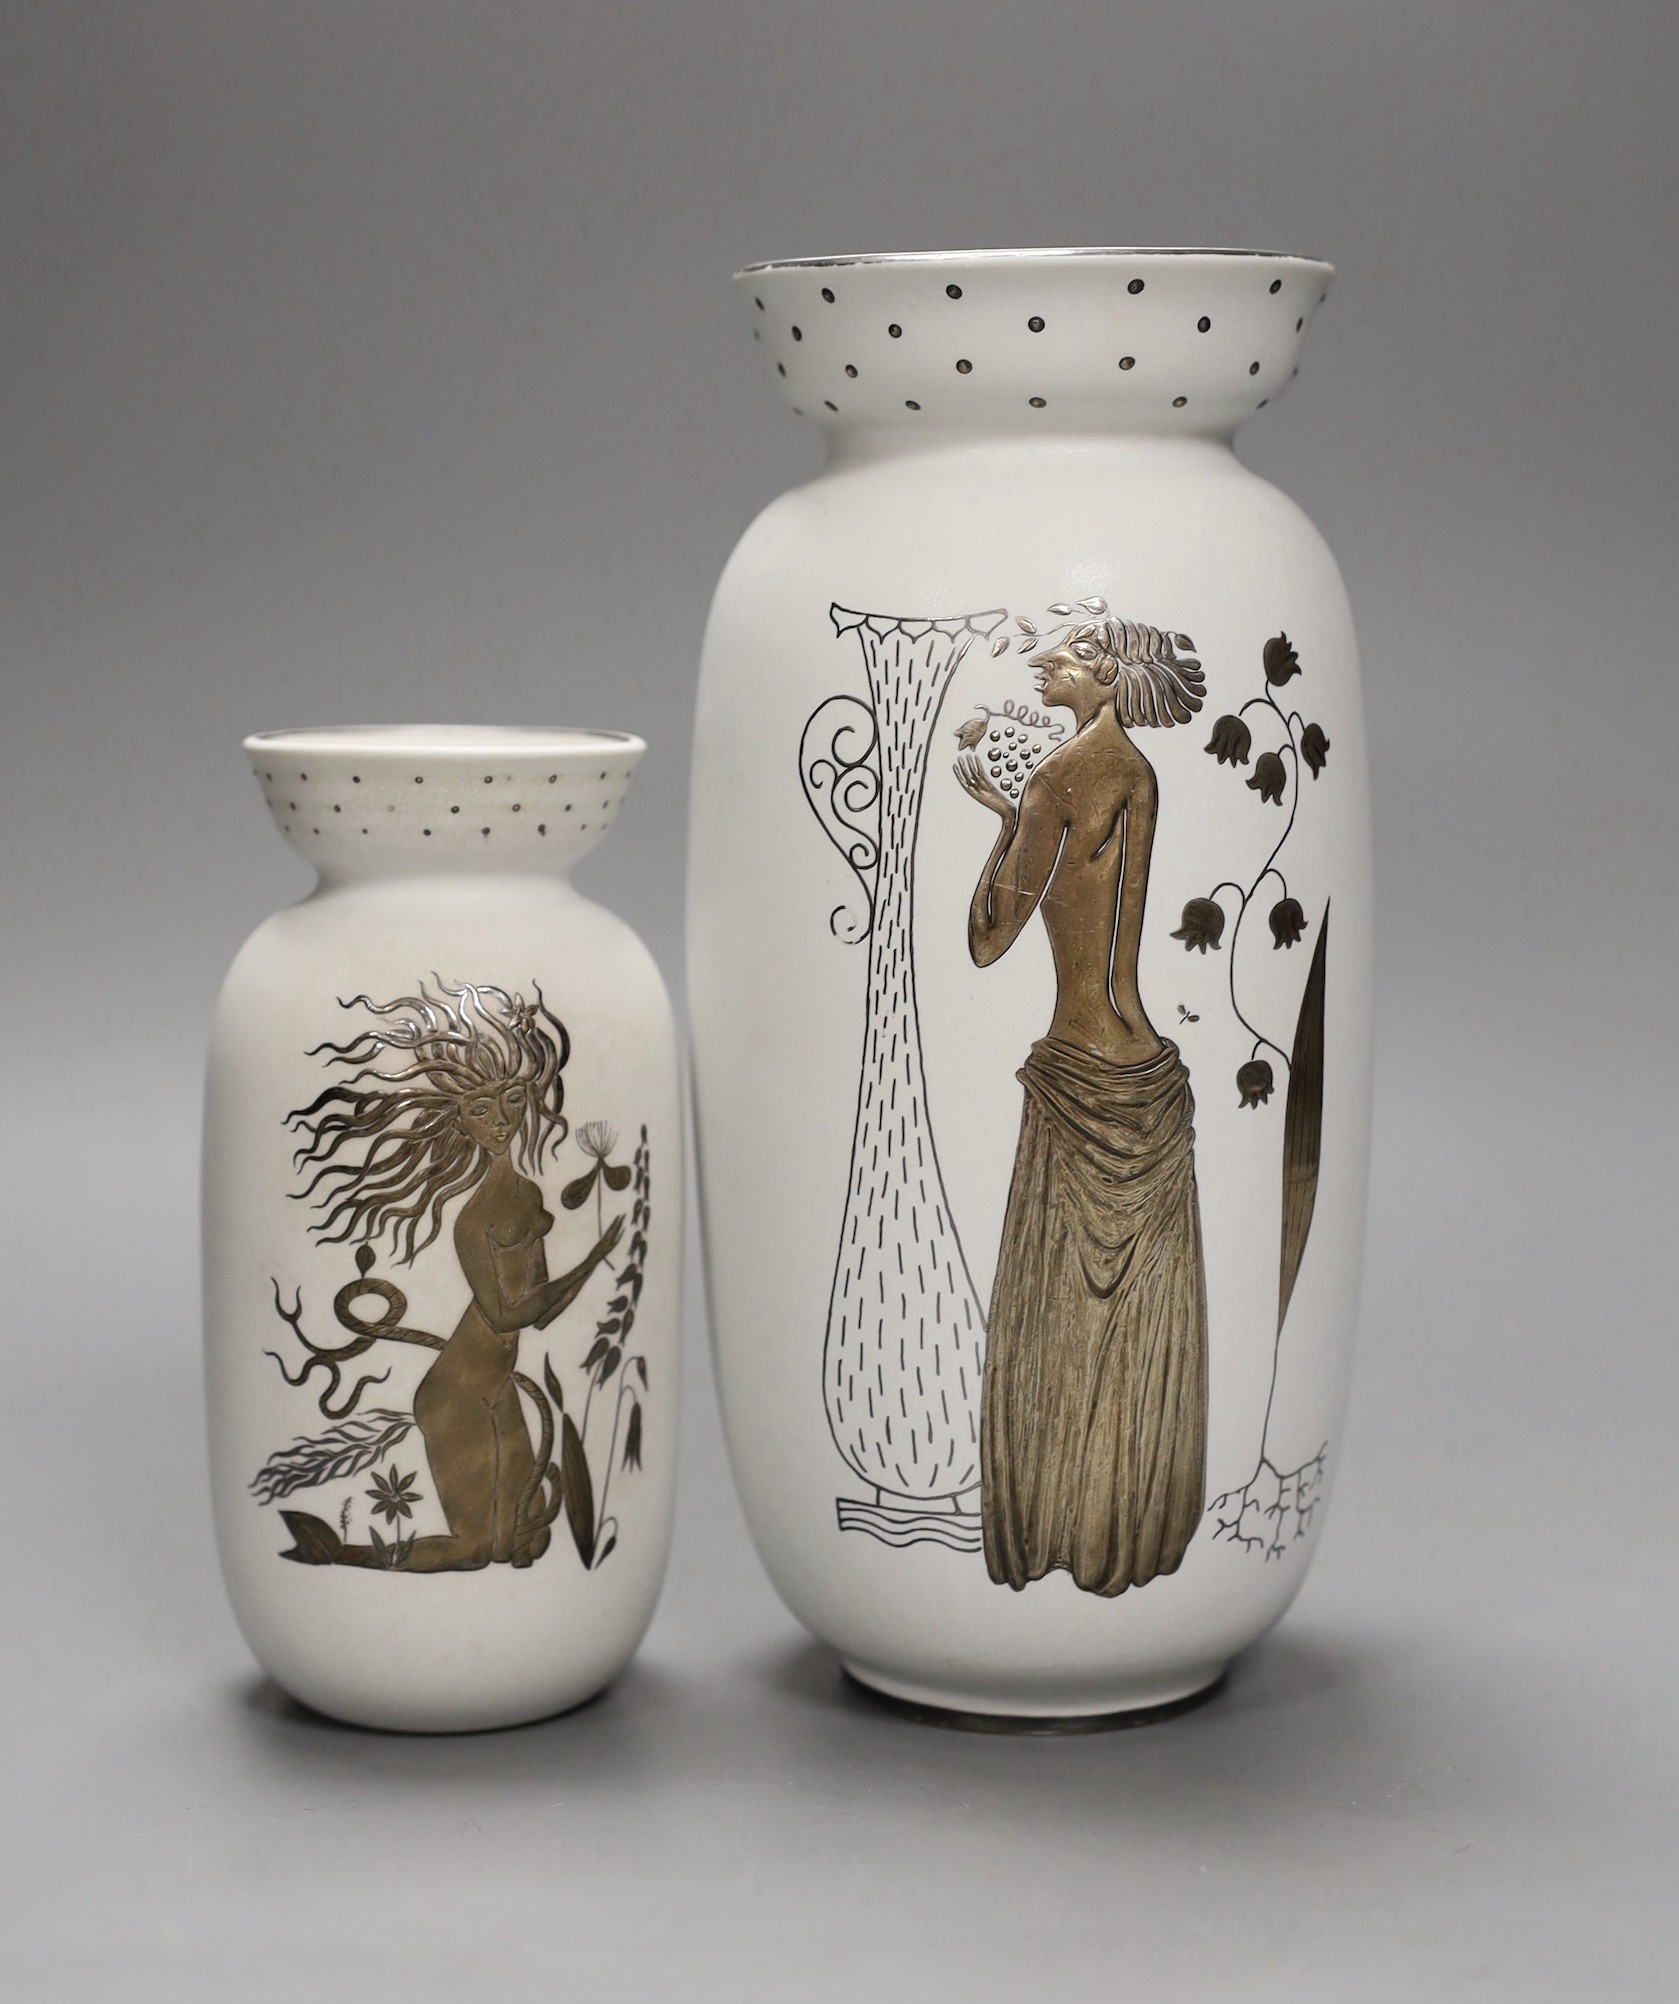 A Gustavsberg Stig Lindberg 215 shape Grazia vase decorated with a woman, vase and flowers, with dotted rim and a 216 vase with a nude woman, 20cm